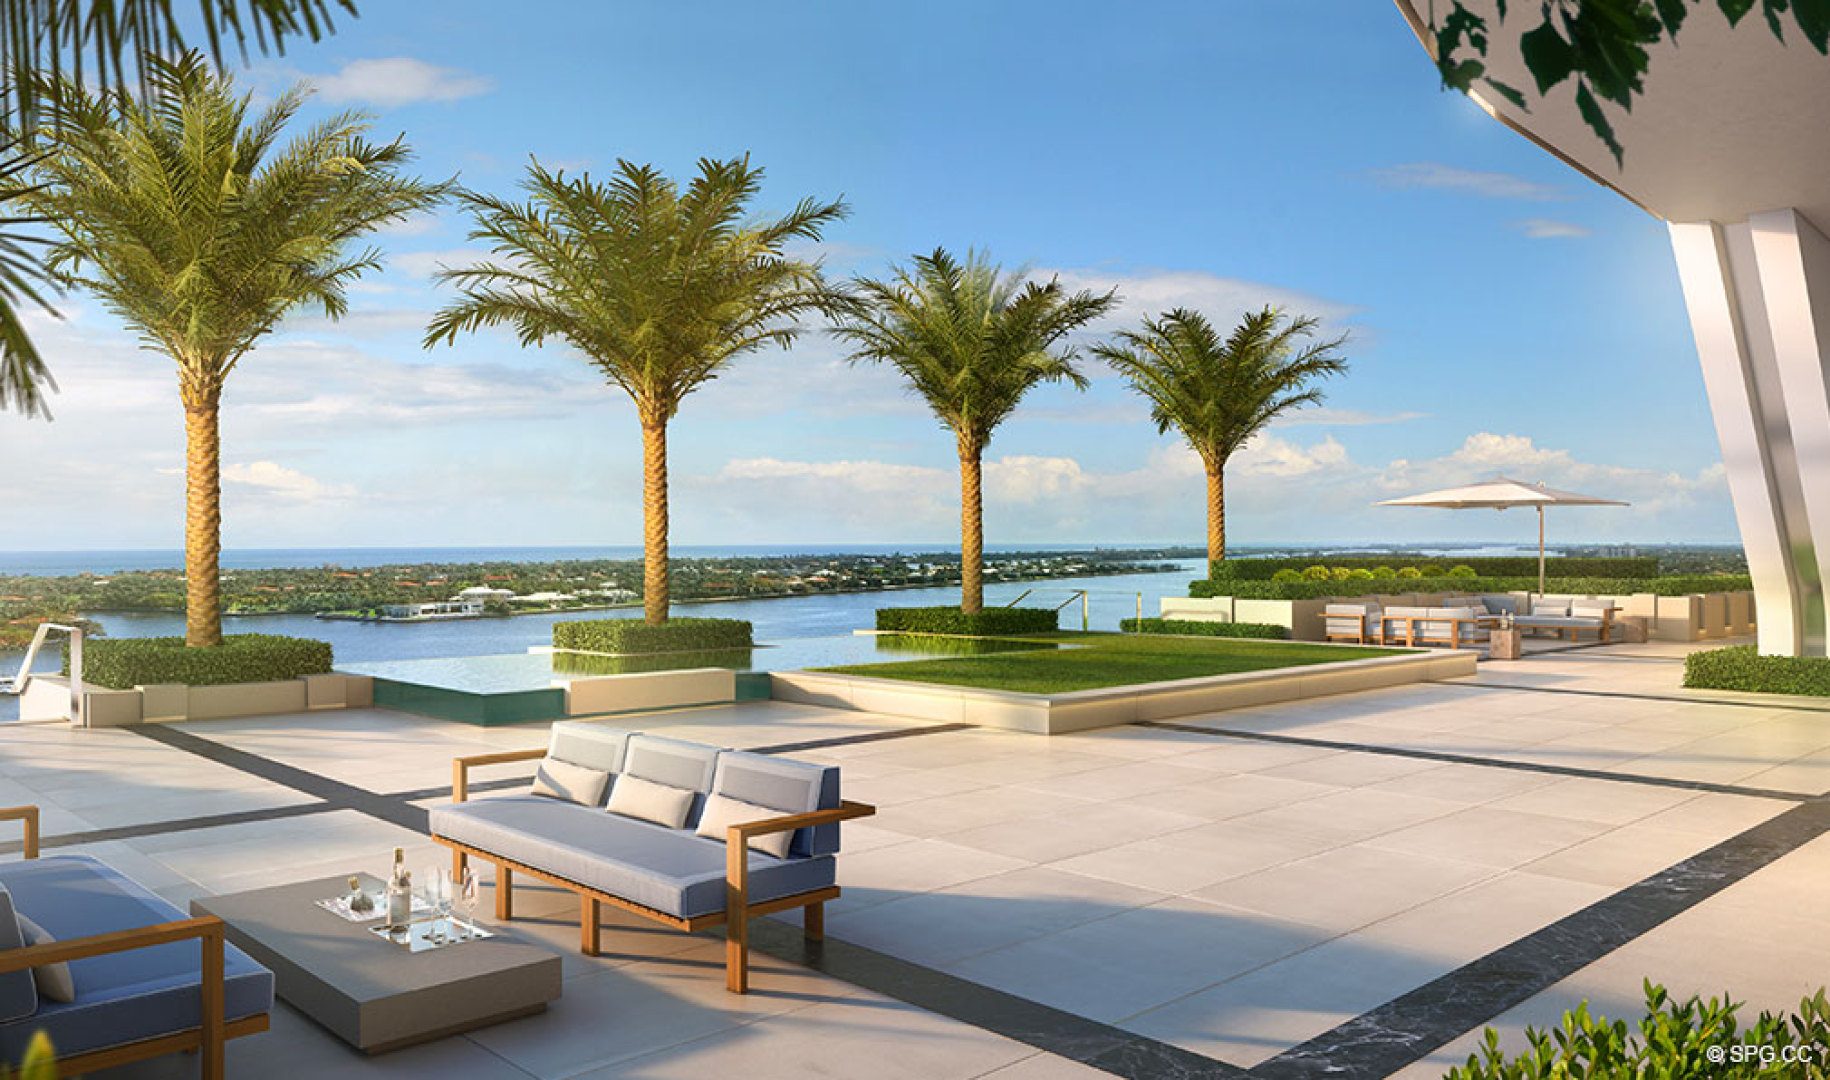 Gorgeous Amenity Views at The Bristol, Luxury Waterfront Condos in West Palm Beach, Florida 33401